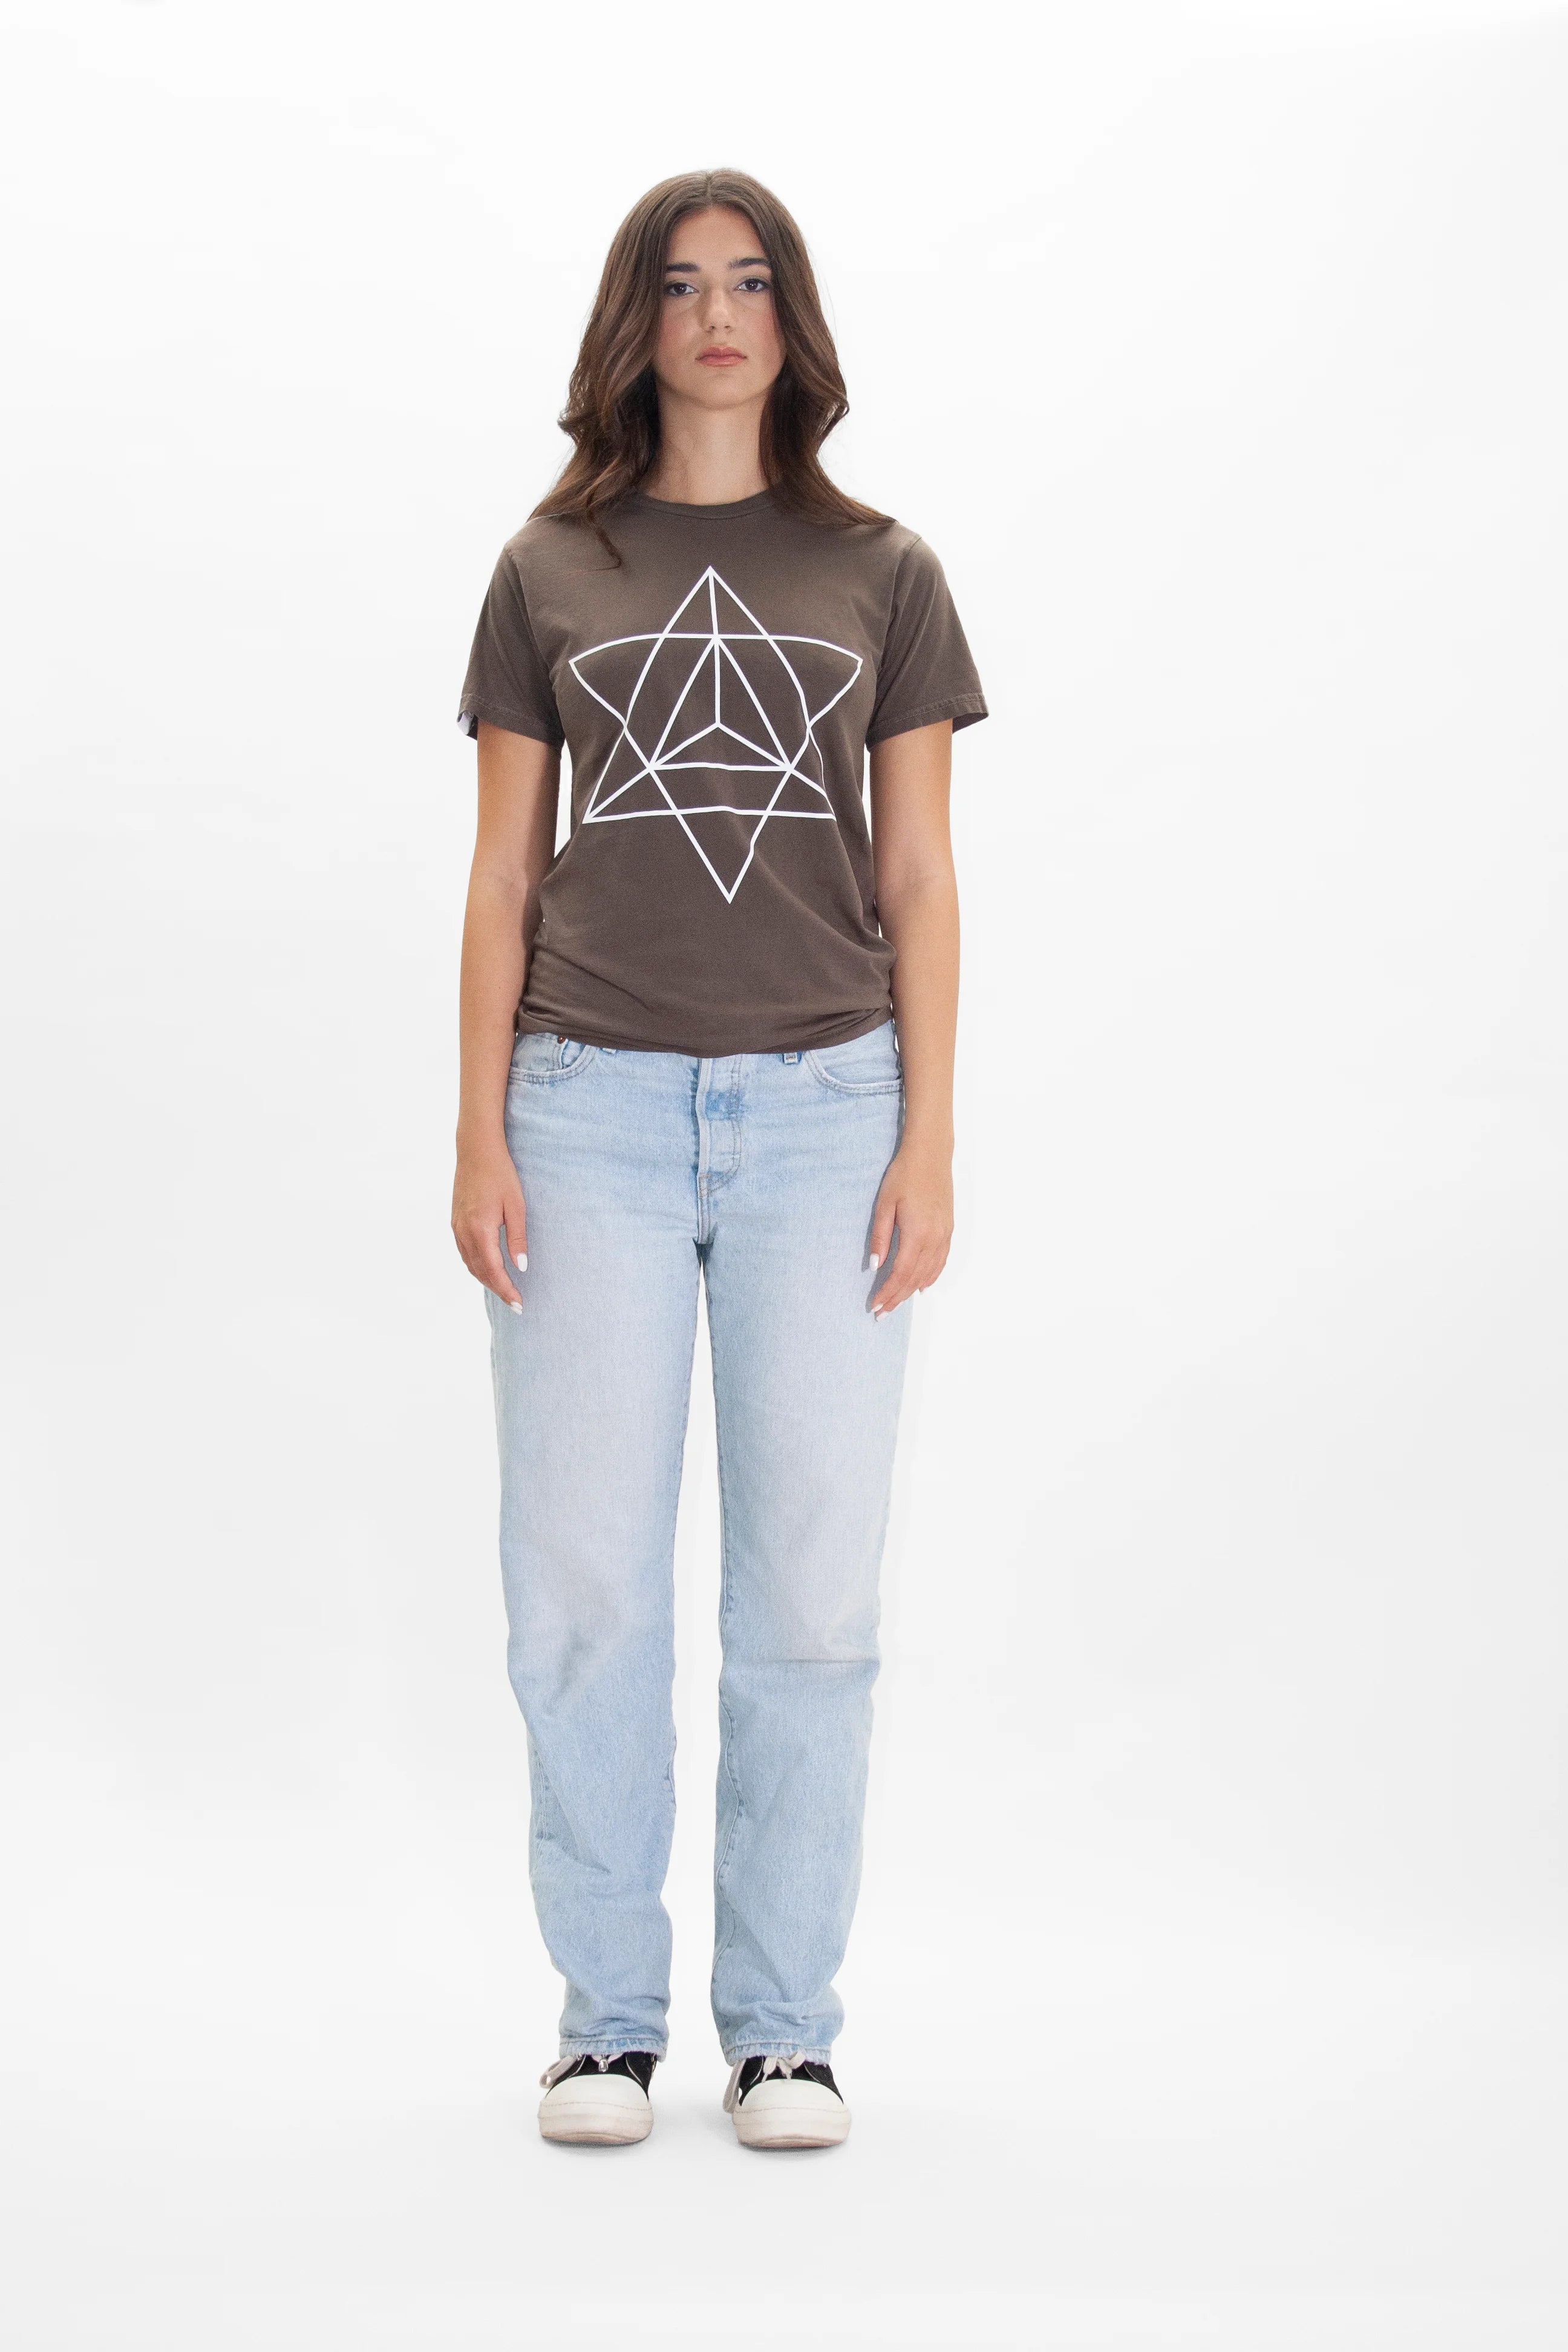 A woman wearing jeans and a t-shirt with the MERKABA TEE IN EARTH from GFLApparel.